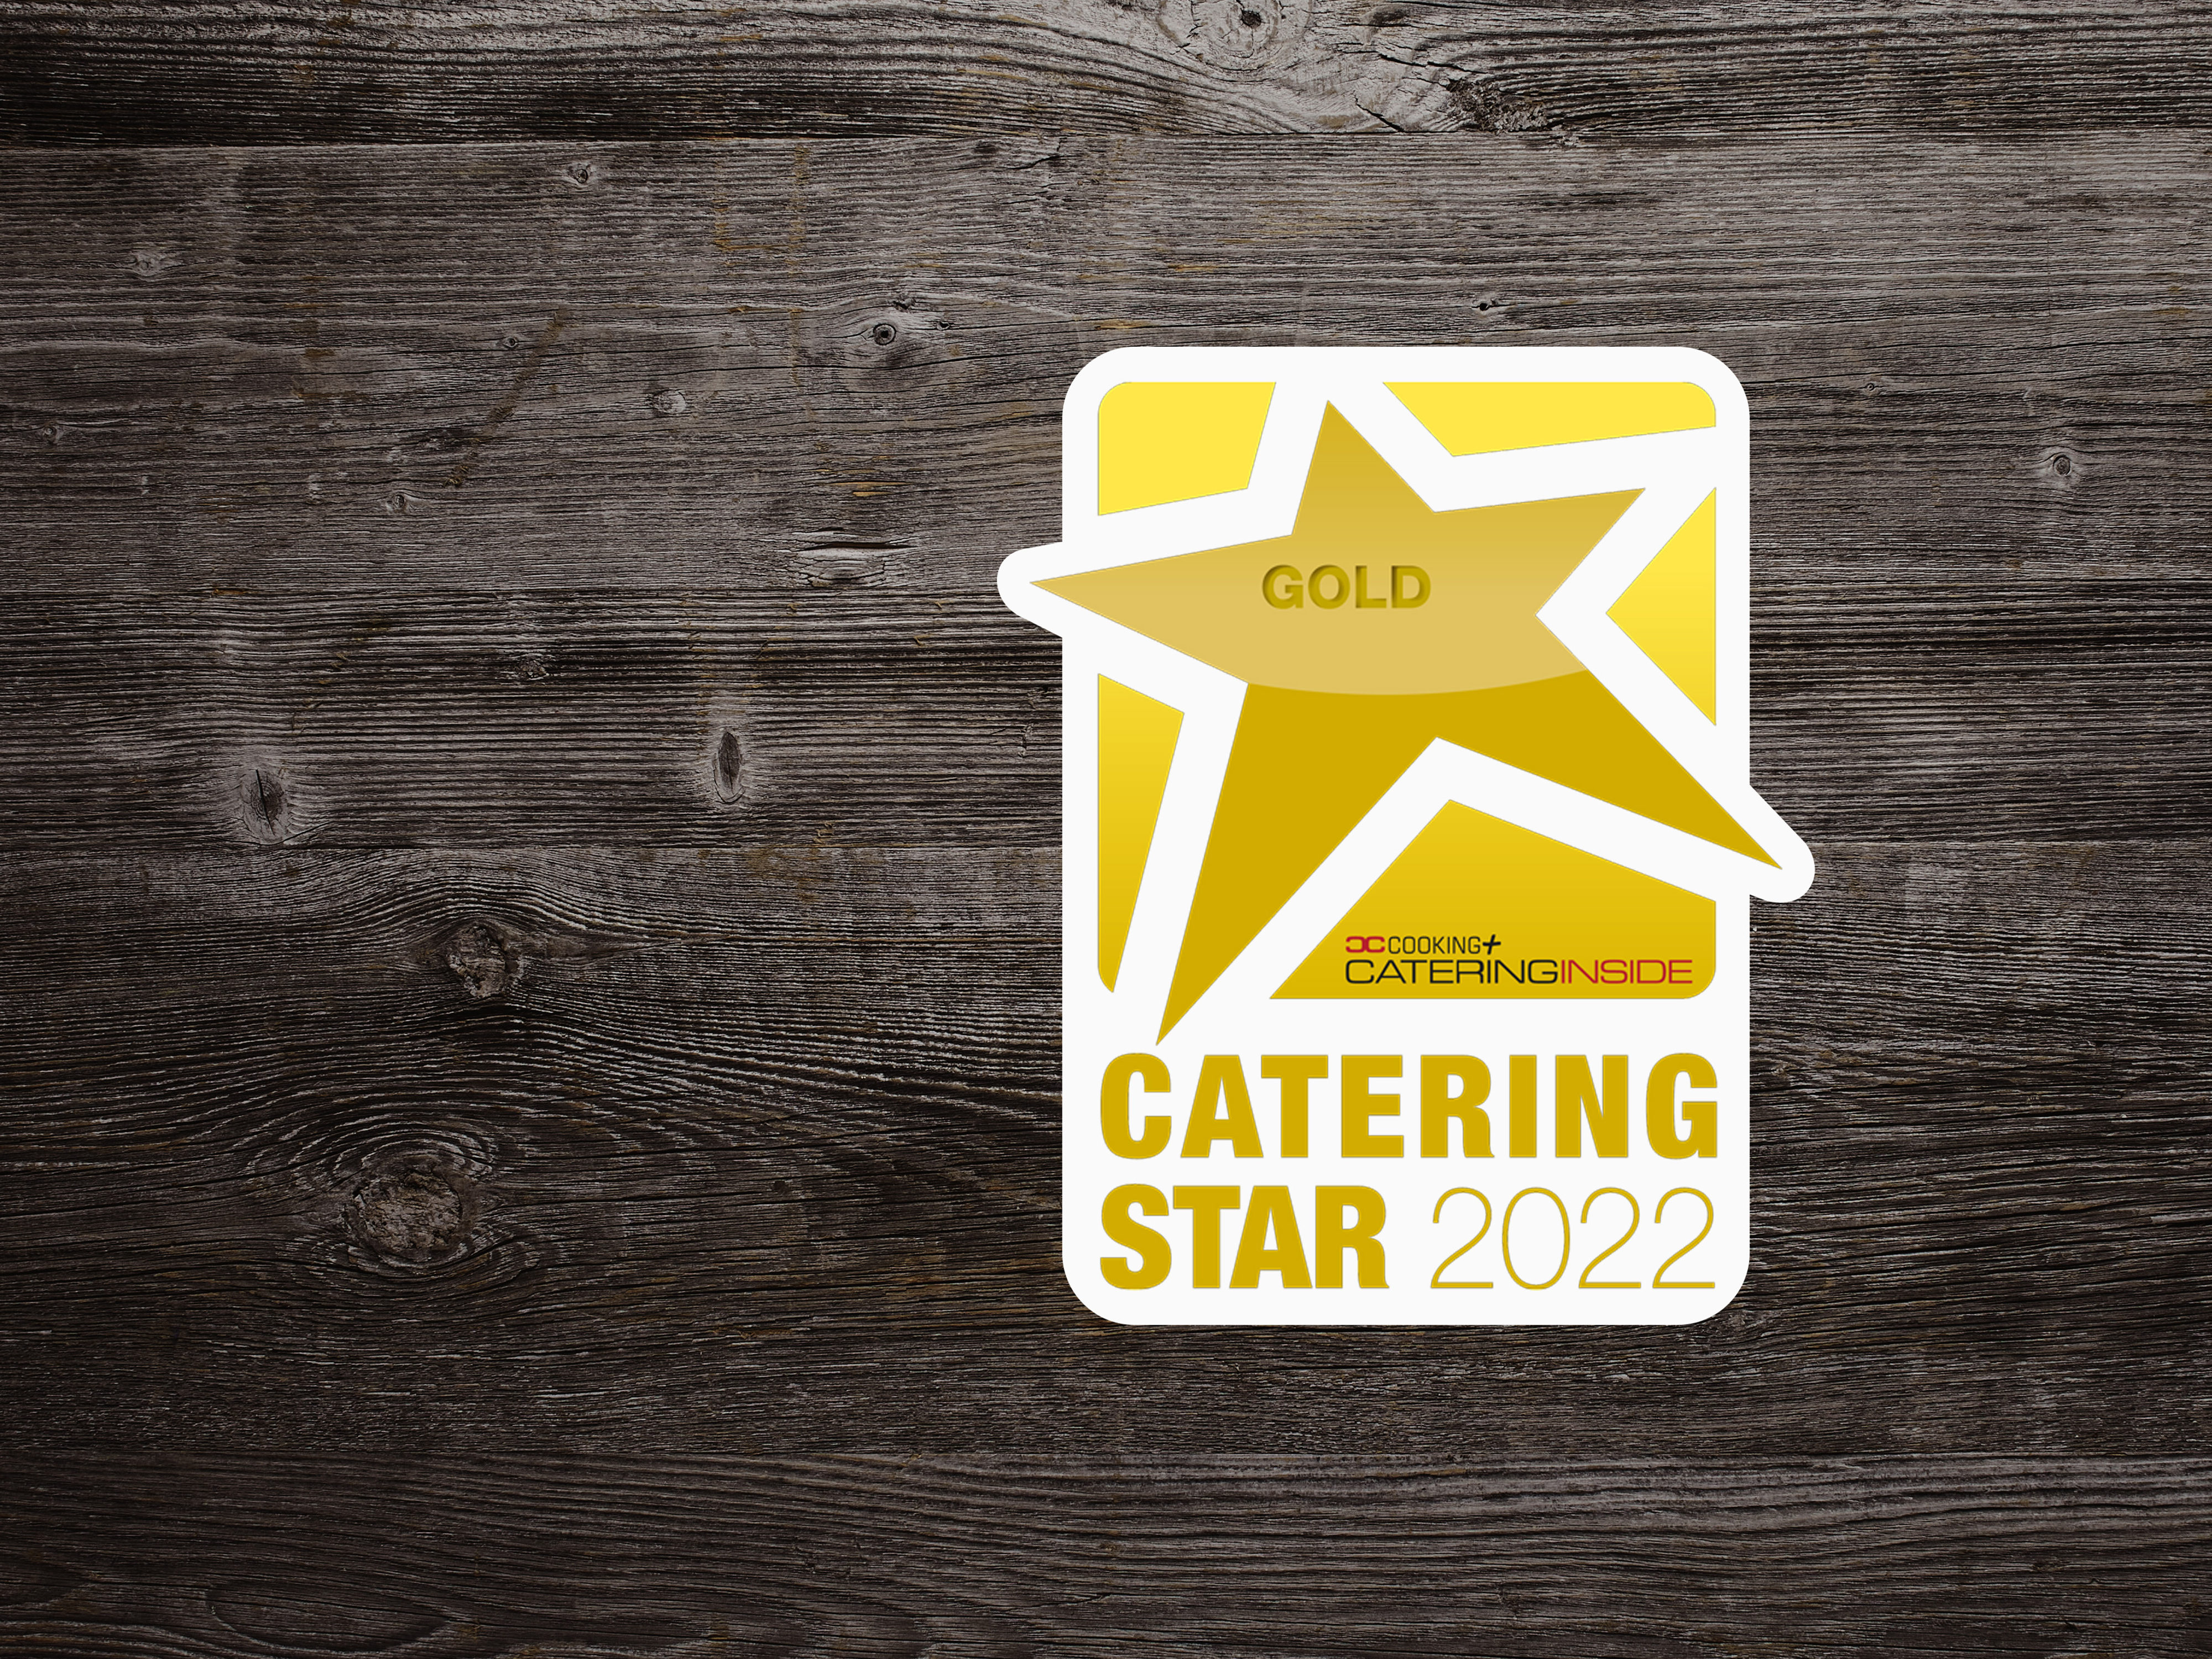 Catering Star 2022